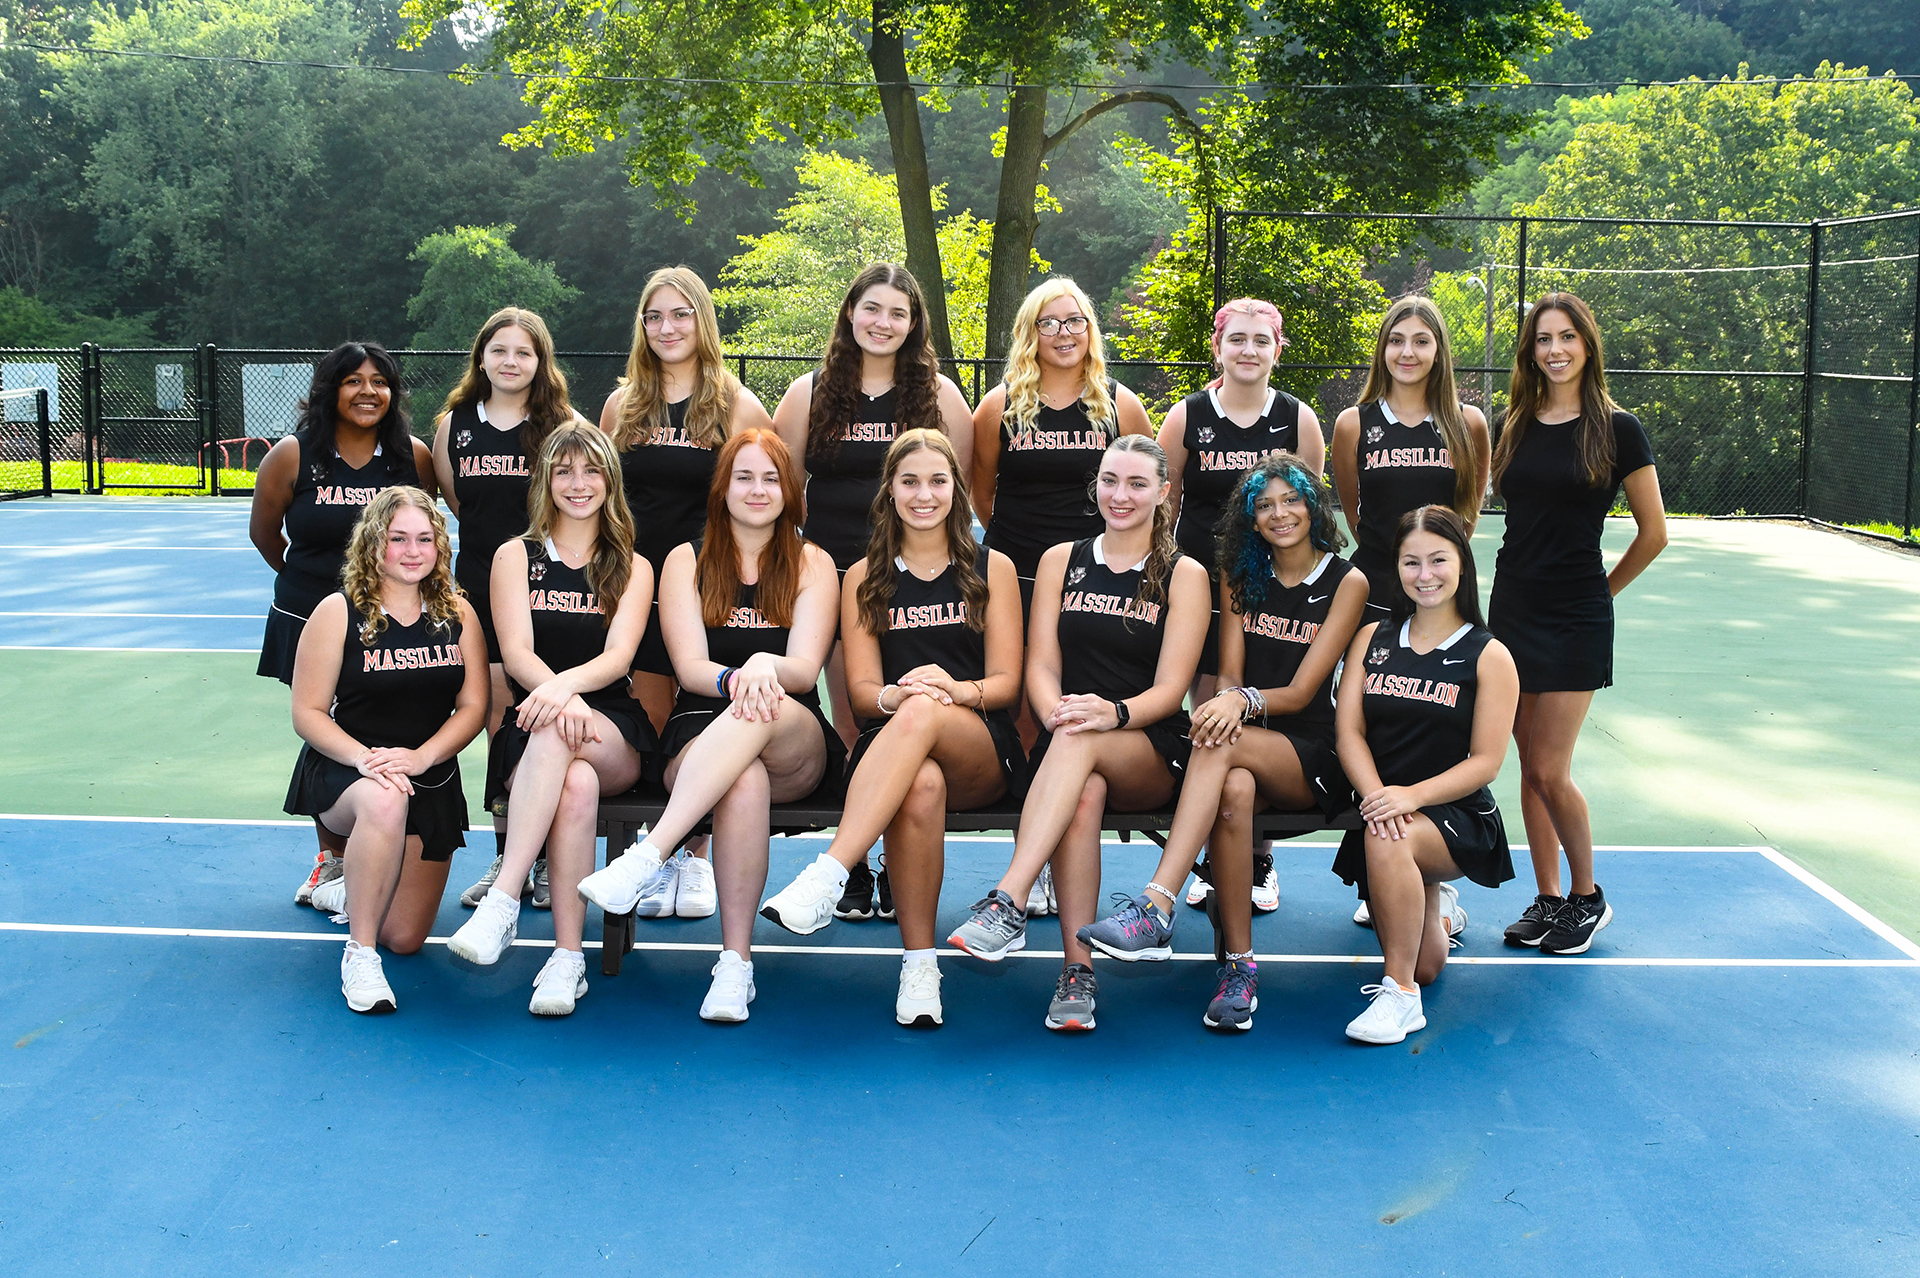 Girls tennis.  One player missing.